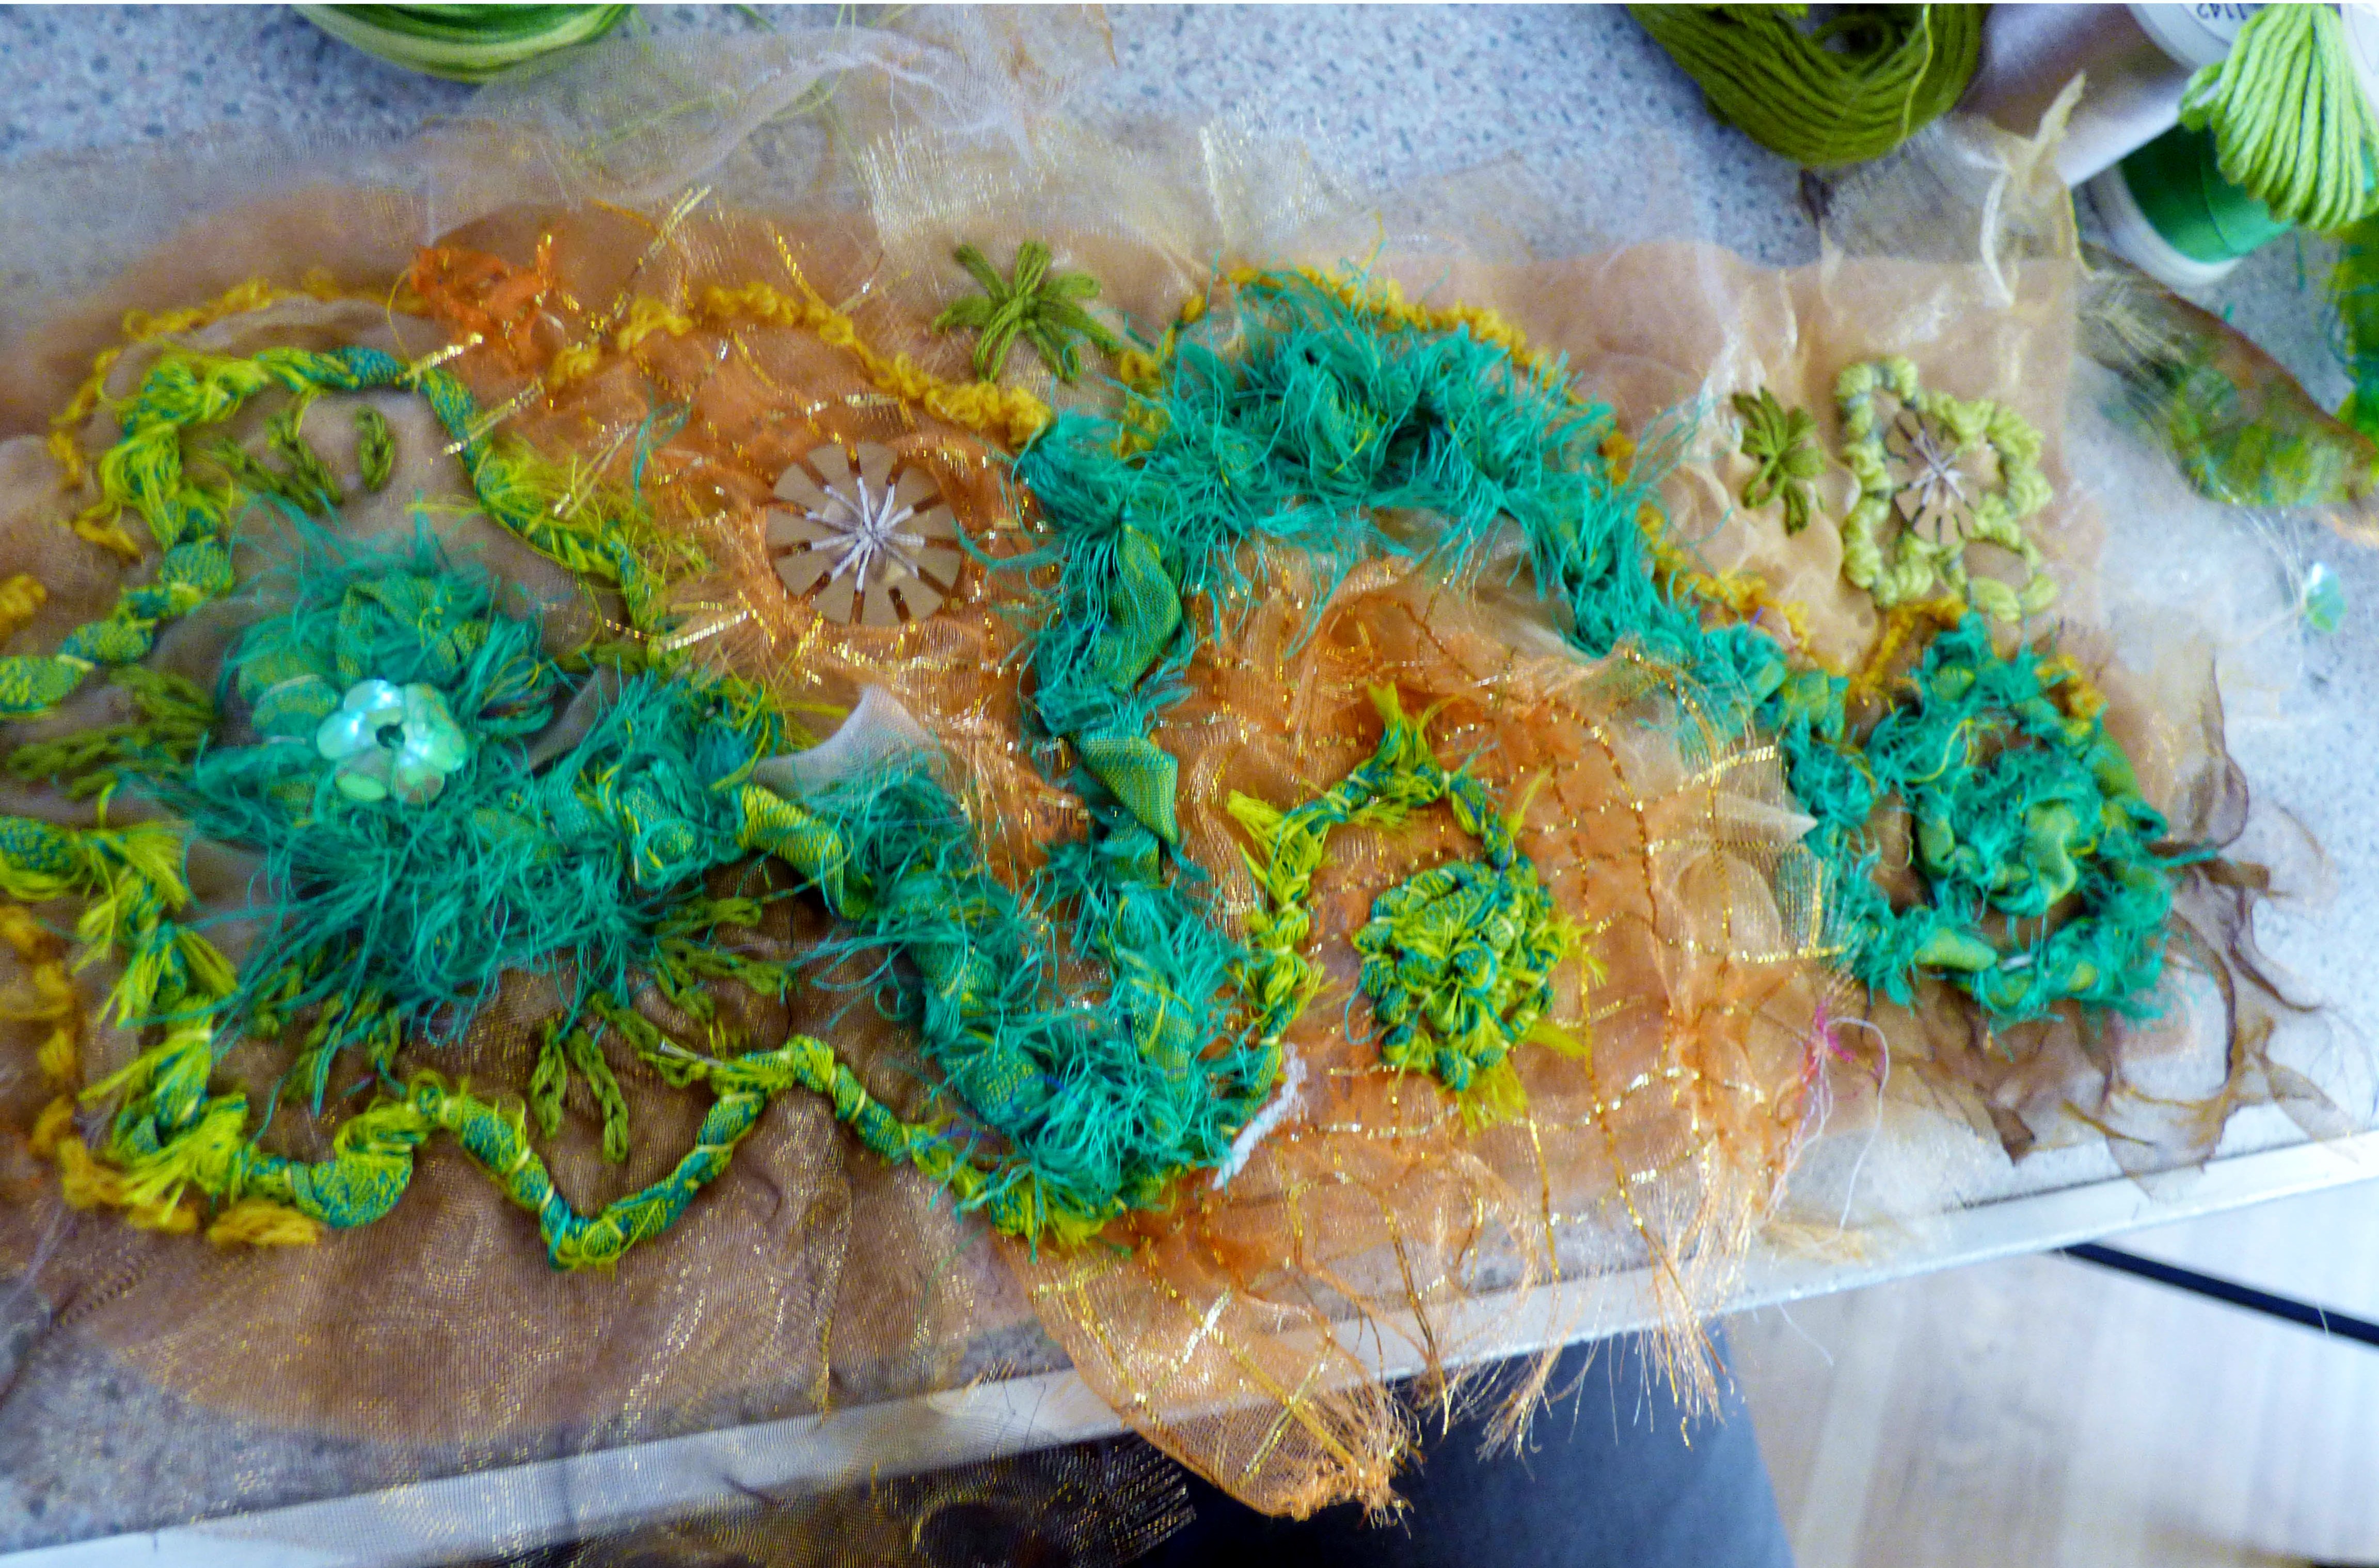 student's work in progress at "Creating with Sari Silk" workshop with Diane Moore, Feb 2023